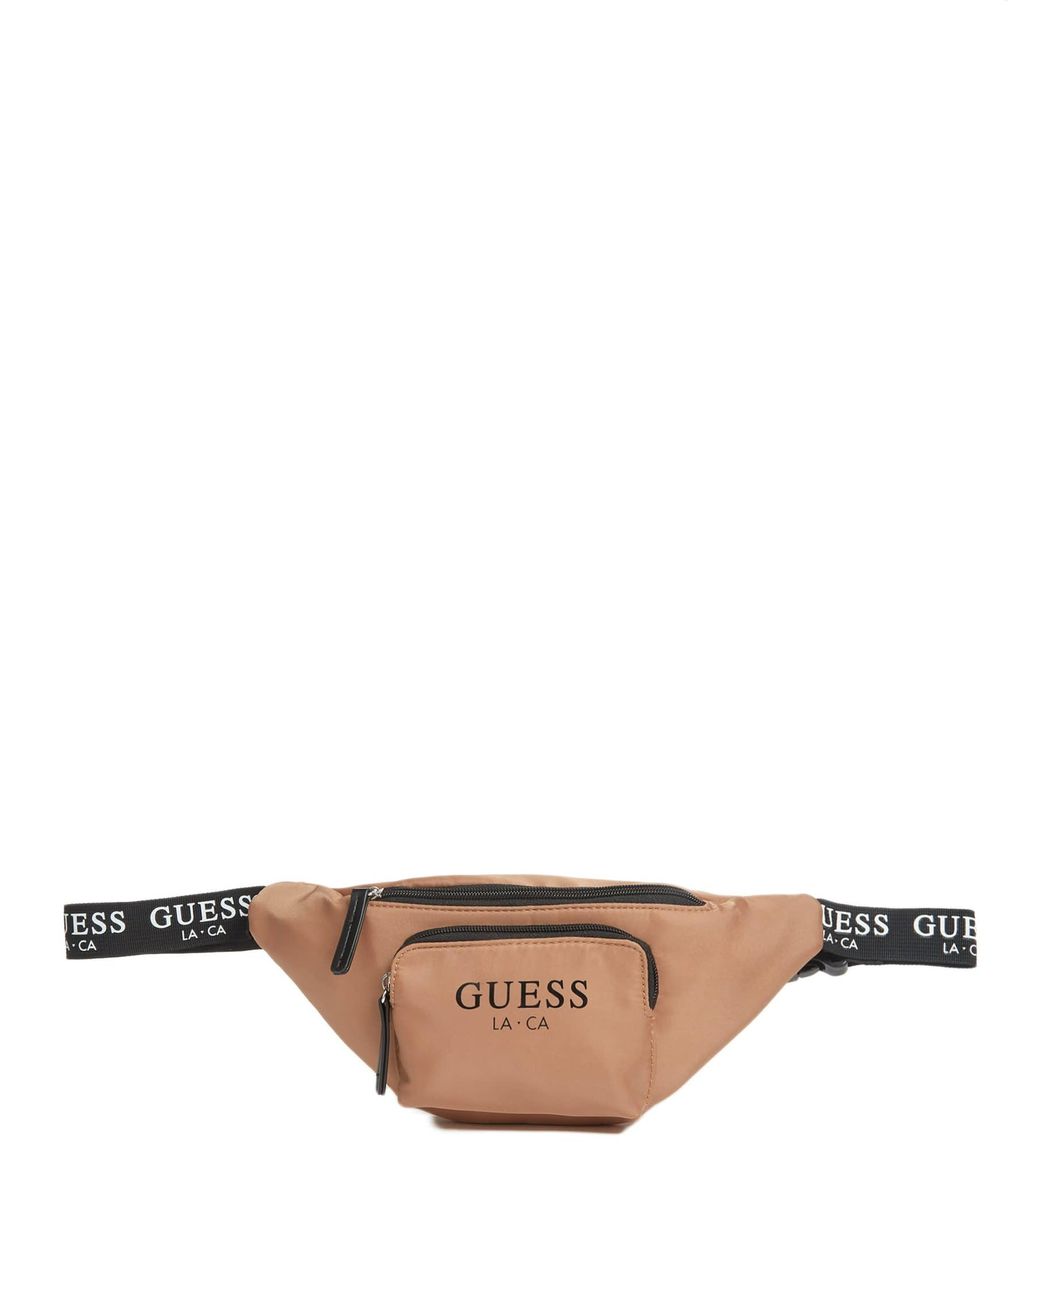 Guess Factory Logo Tape Fanny Pack in Natural | Lyst